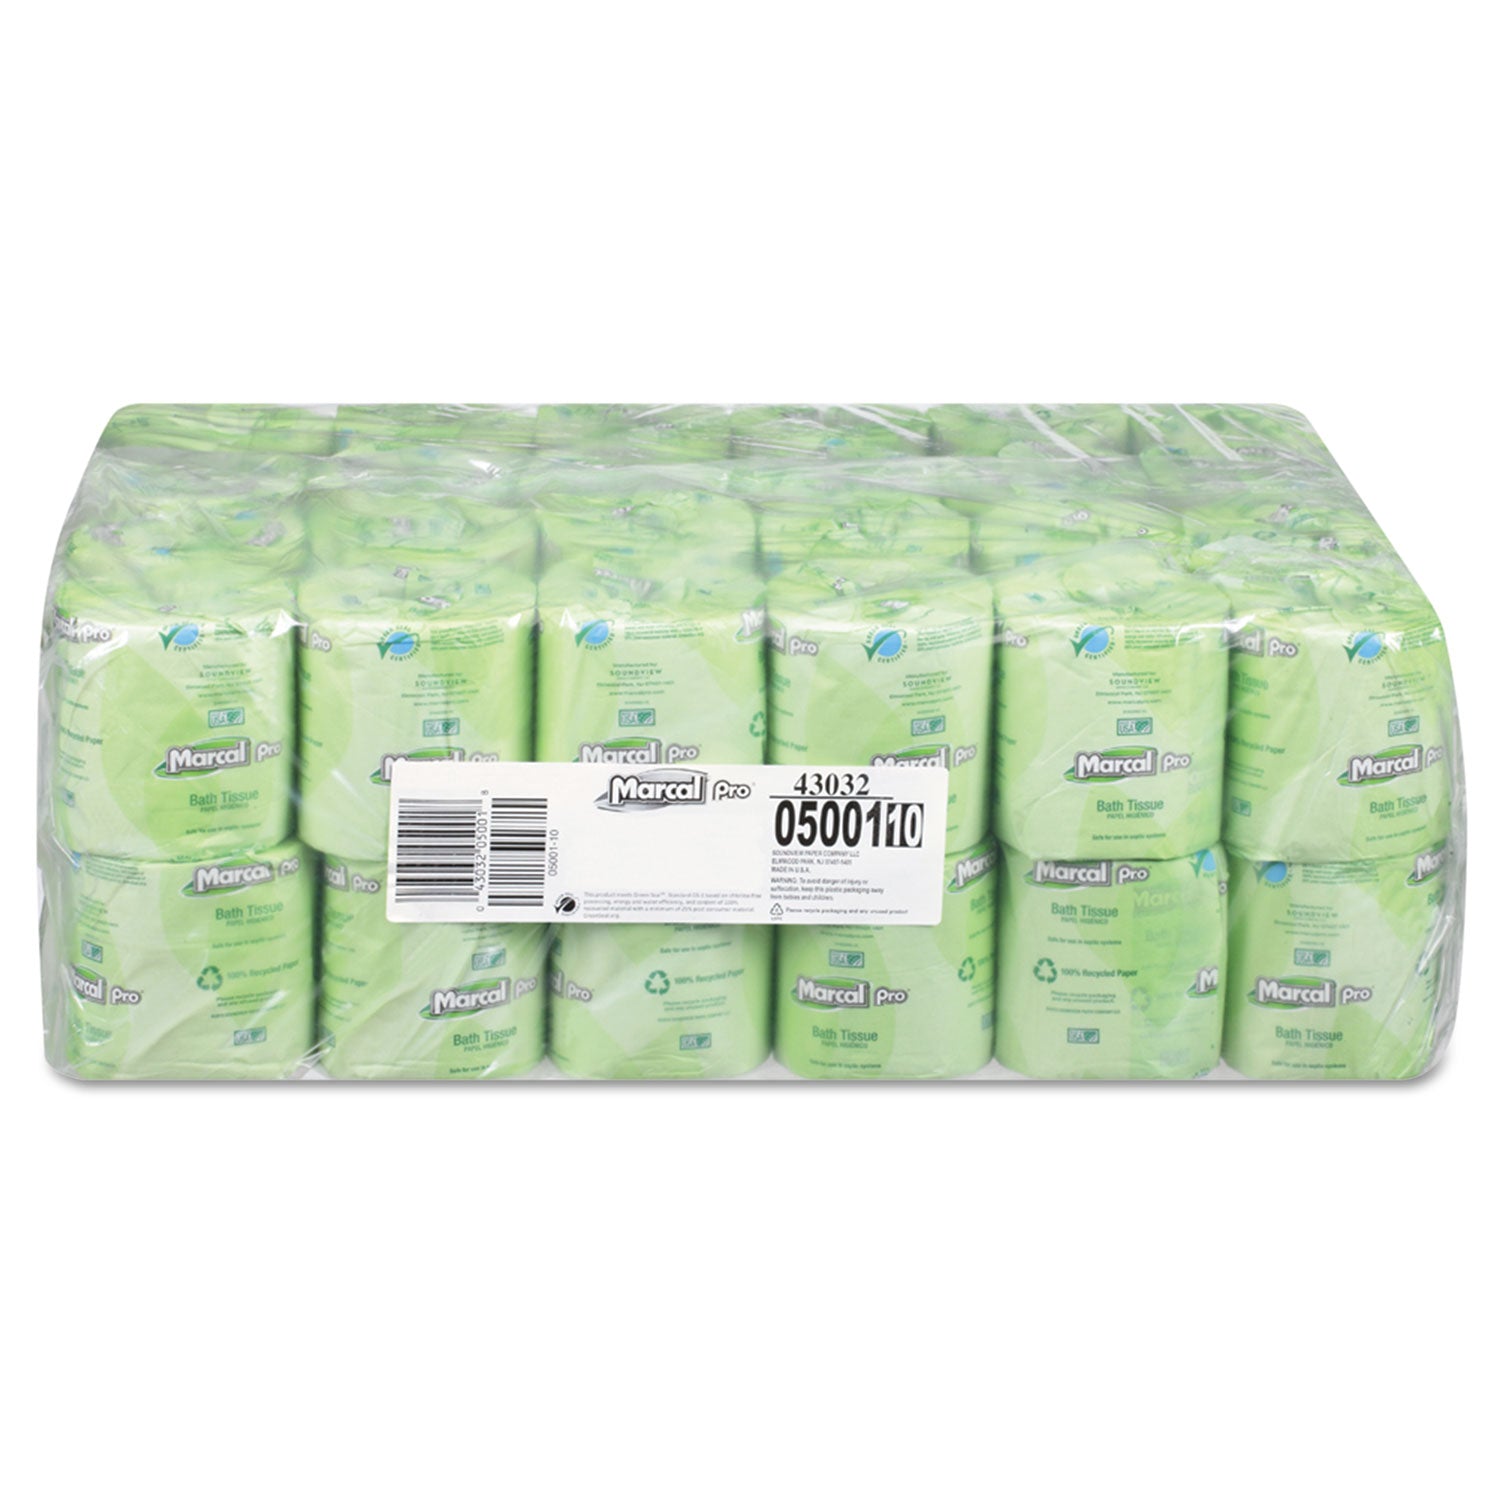 100% Recycled 2-Ply Bath Tissue, Septic Safe, 2-Ply, White, 500 Sheets/Roll, 48 Rolls/Carton - 